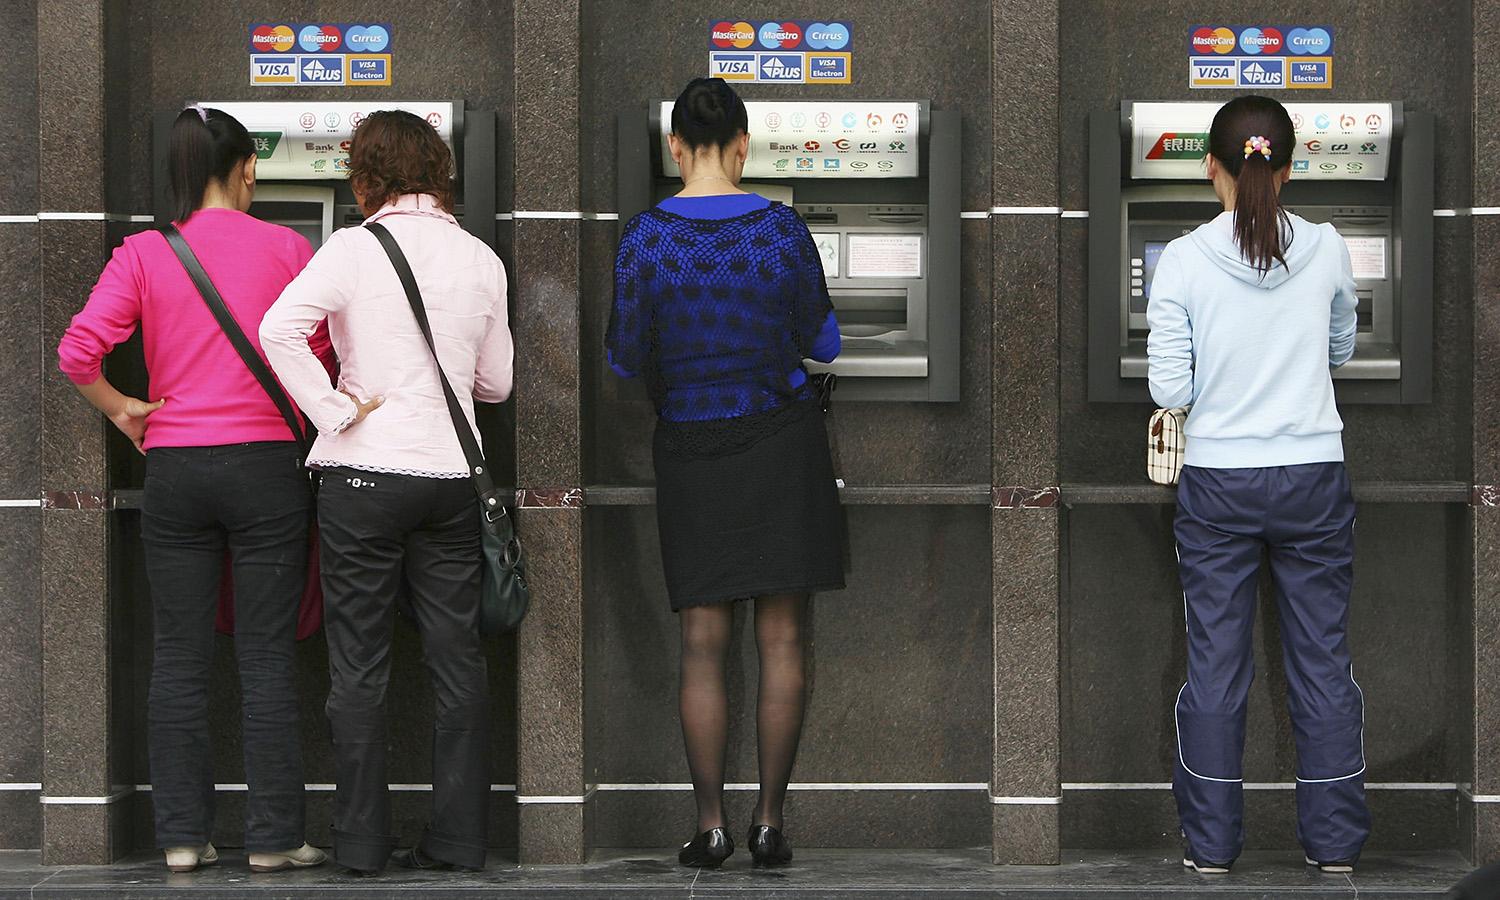 A ransomware attack on HR vendor Kronos has created payroll issues for healthcare employees. Pictured: People draw money from automatic teller machines at a street on April 3, 2006, in Chongqing Municipality, China. (Photo by China Photos via Getty Images)